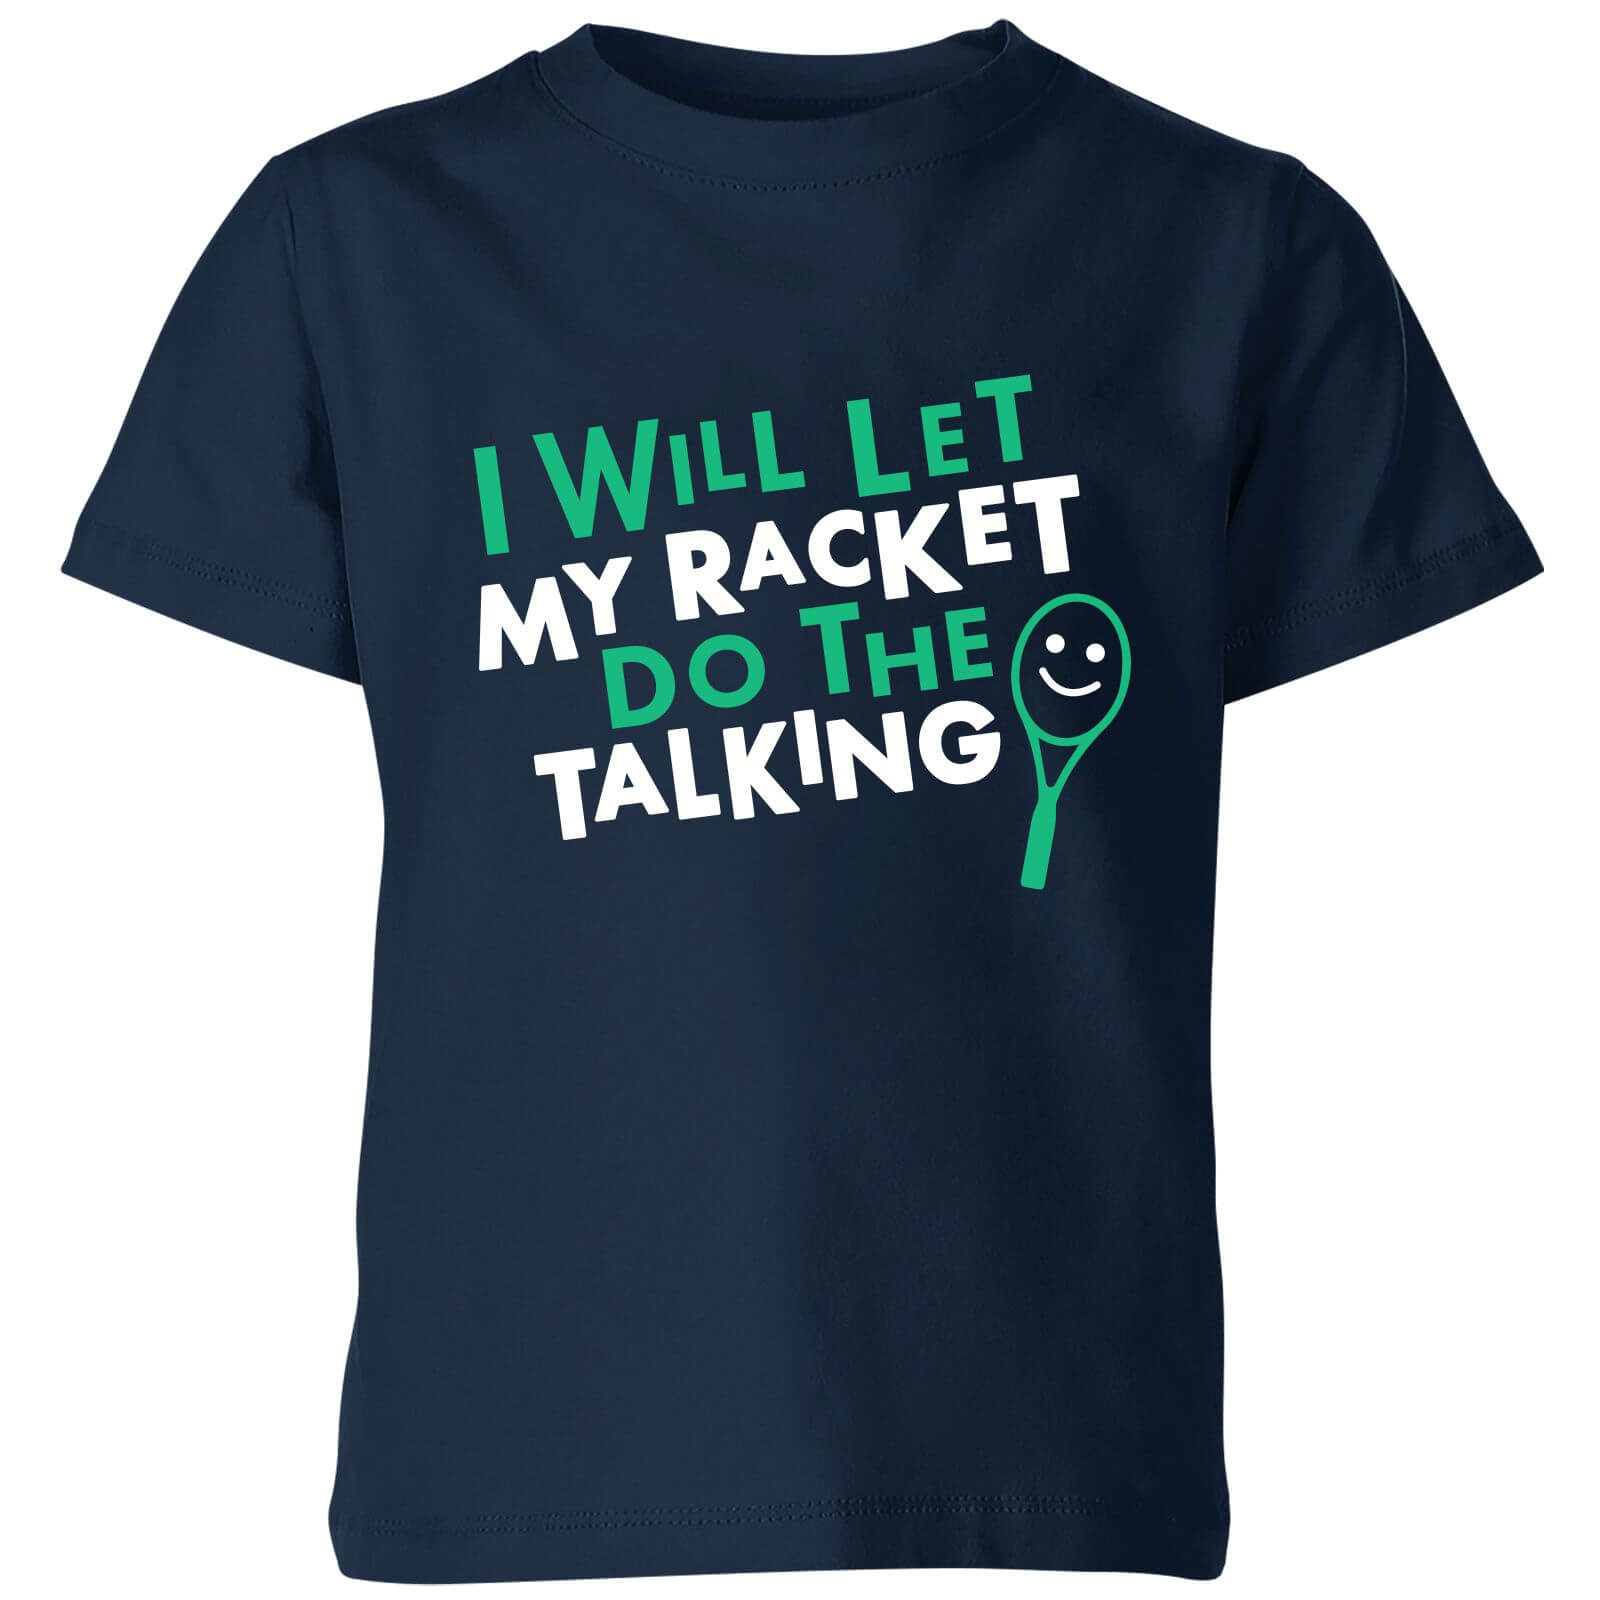 I will let my Racket do the Talking Kids' T-Shirt - Navy - 3-4 Years - Navy